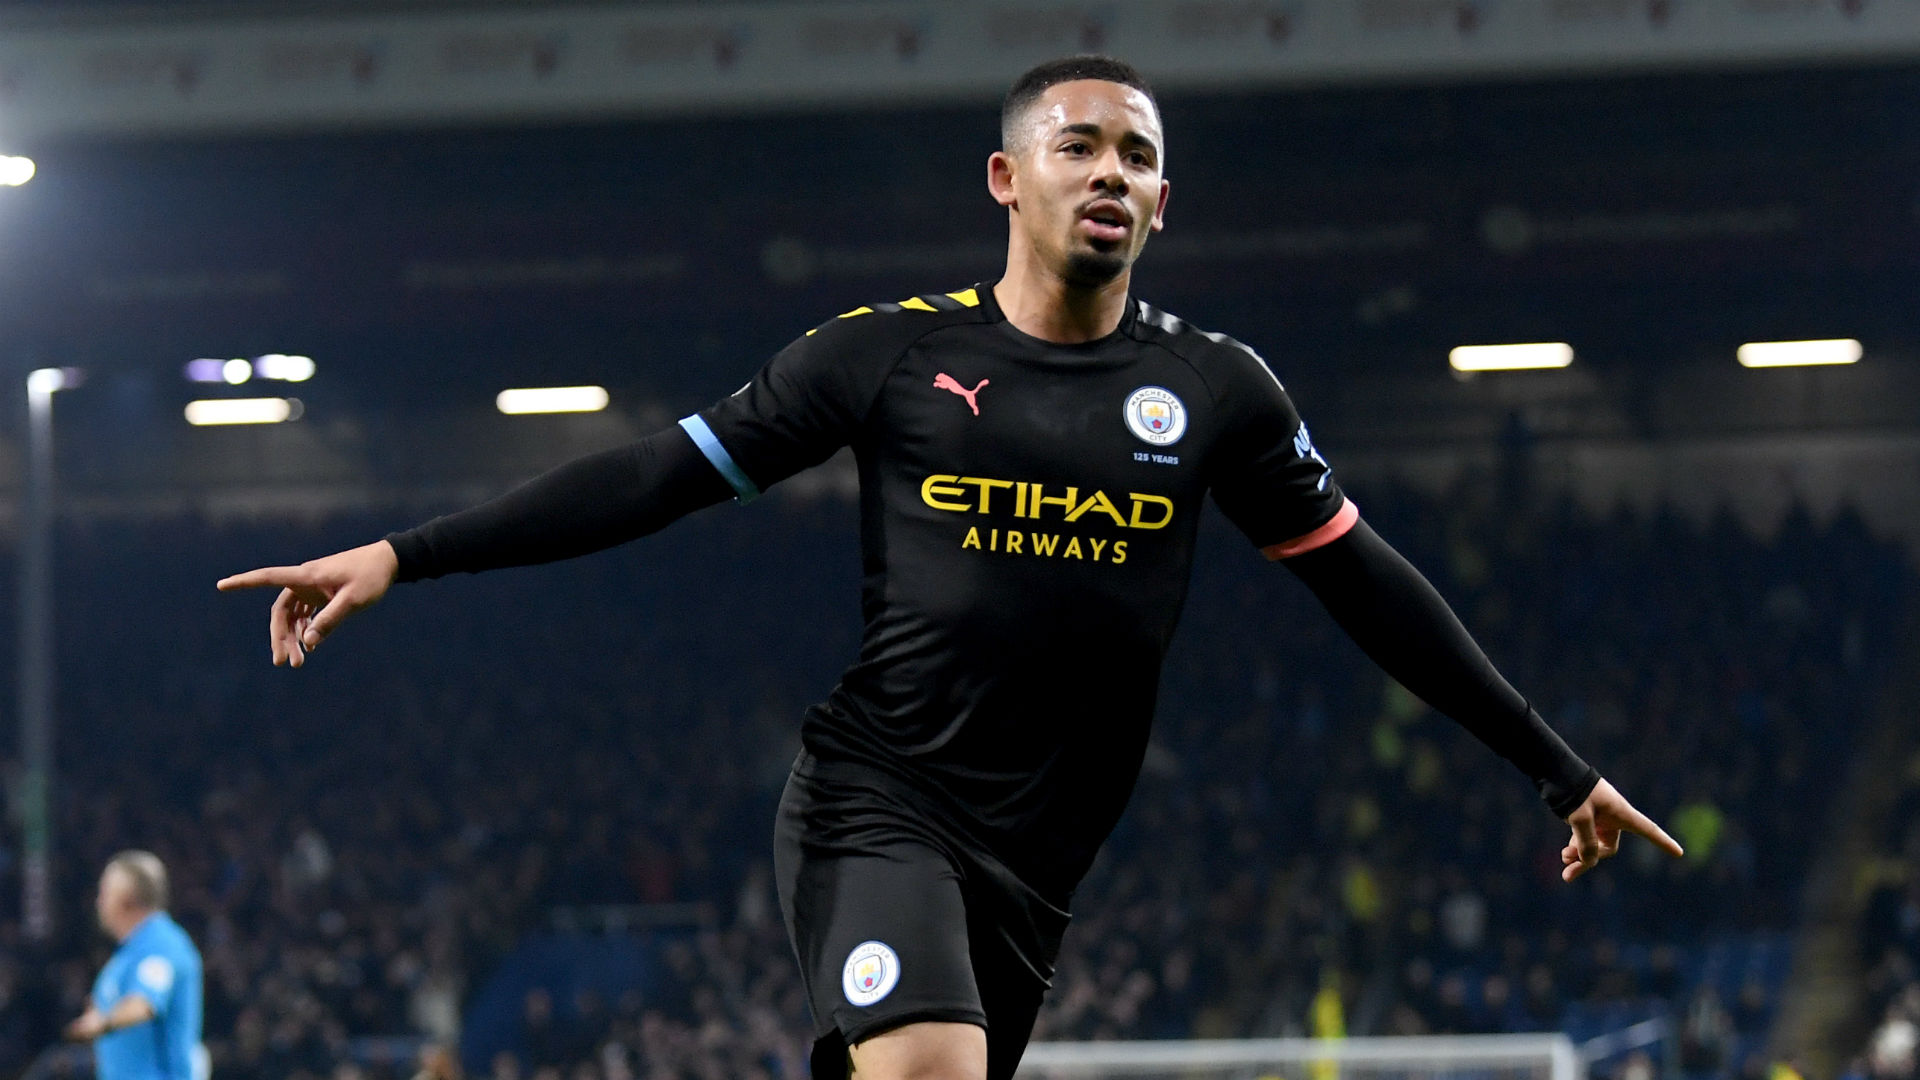 Ahead of the Manchester derby, Manchester City bounced back from their draw with Newcastle United by beating Burnley 4-1.